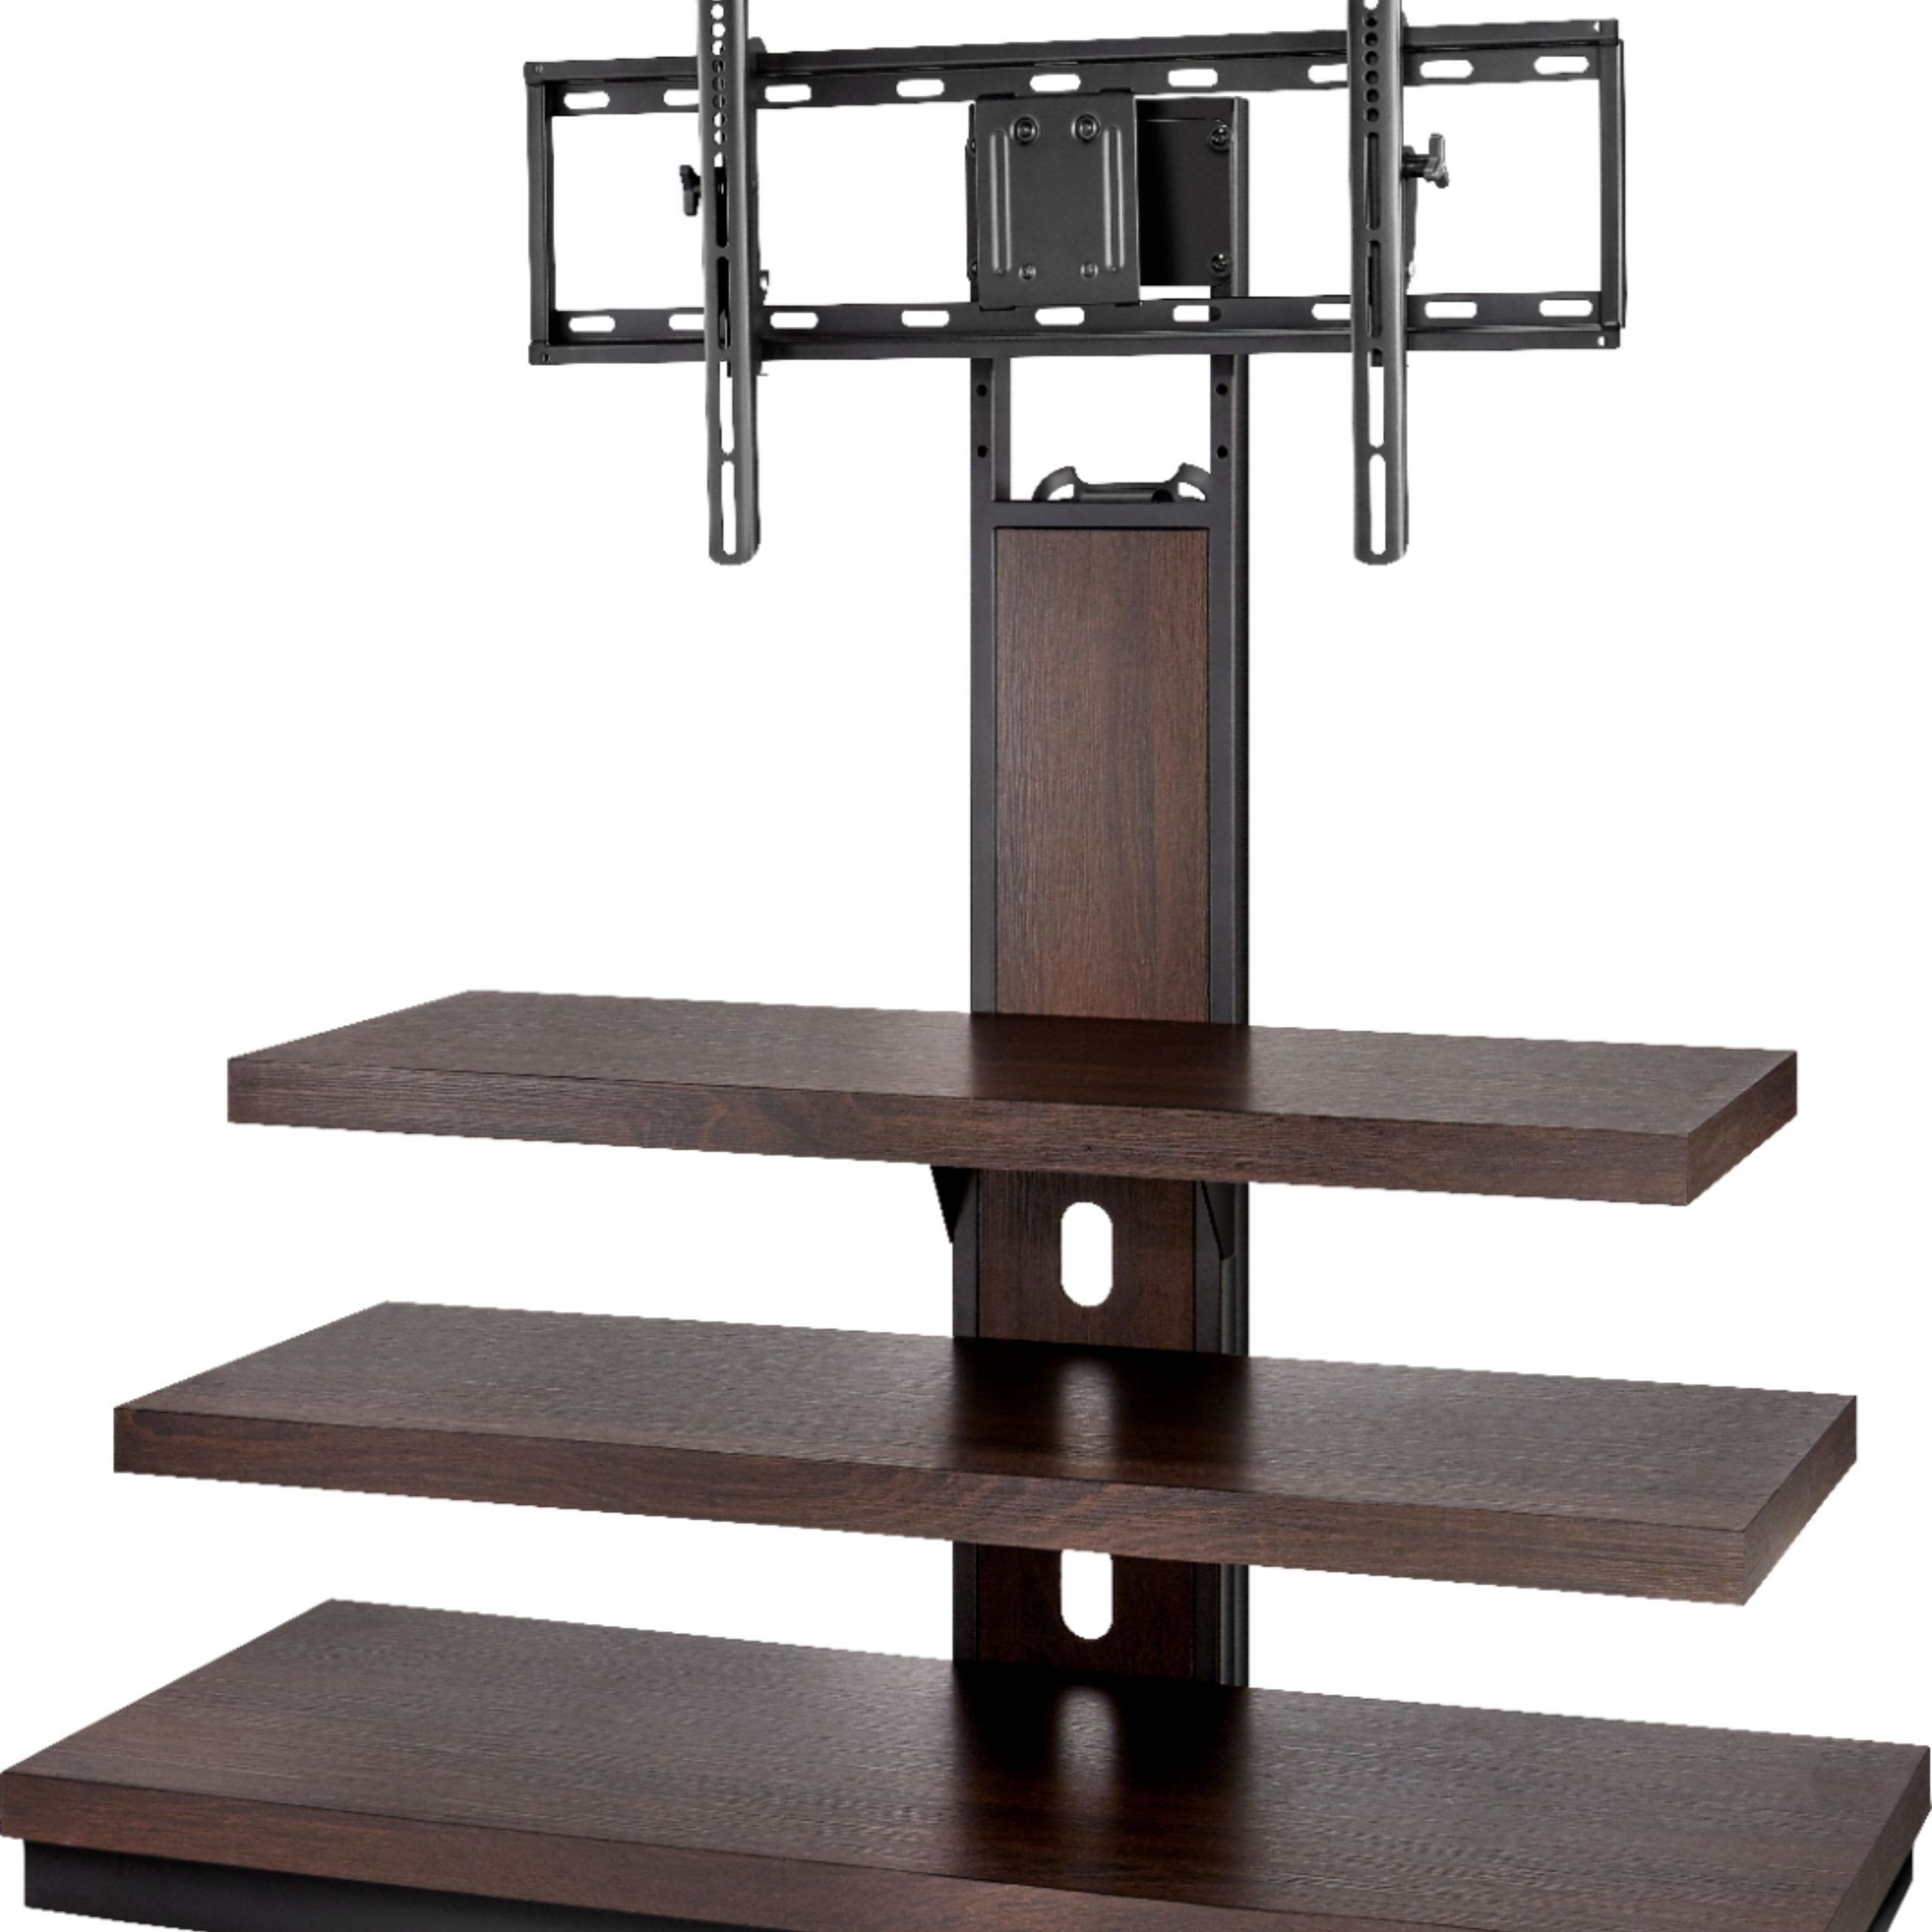 Insignia™ Tv Stand For Most Flat Panel Tvs Up To 55" Dark Pertaining To Lansing Tv Stands For Tvs Up To 55" (Gallery 20 of 20)